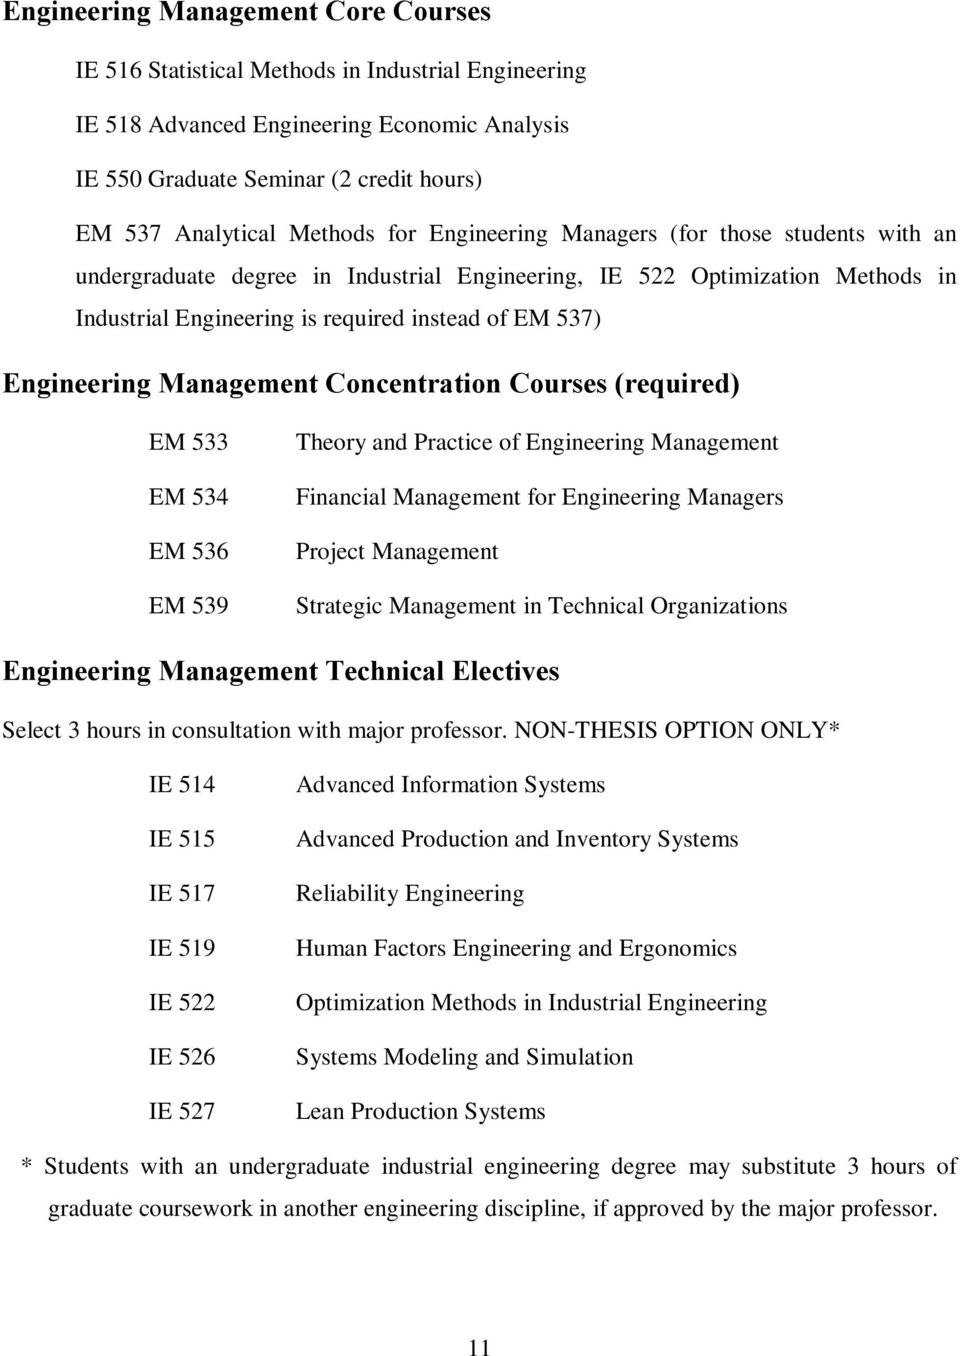 Engineering Management Concentration Courses (required) EM 533 EM 534 EM 536 EM 539 Theory and Practice of Engineering Management Financial Management for Engineering Managers Project Management